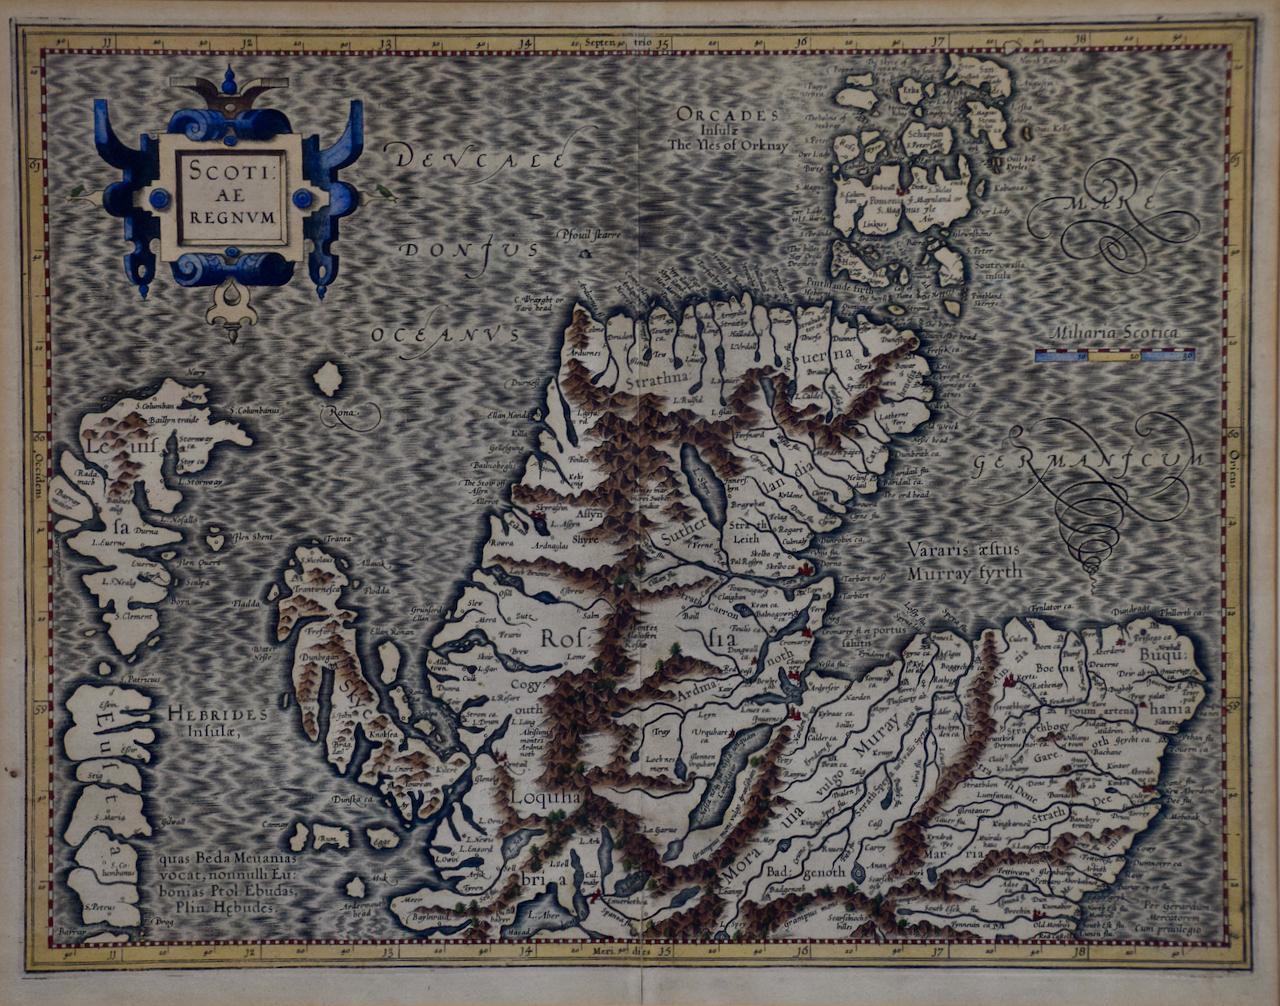 Northern Scotland: 16th Century Hand-colored Map by Mercator - Print by Gerard Mercator